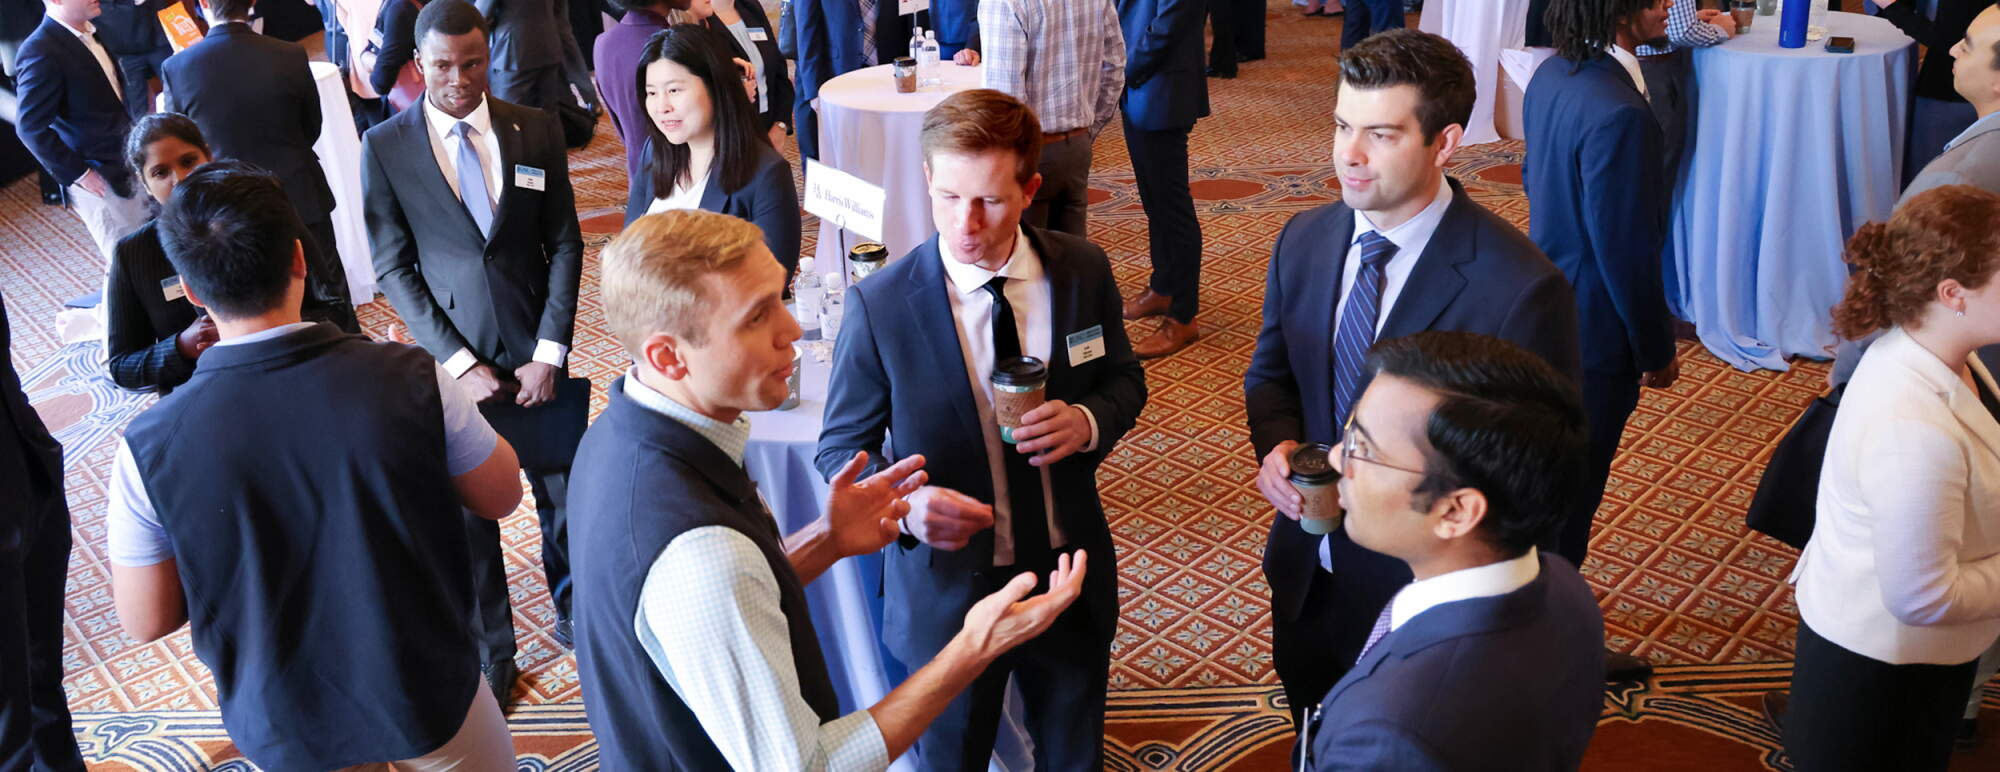 Students talking with a recruiter at an event